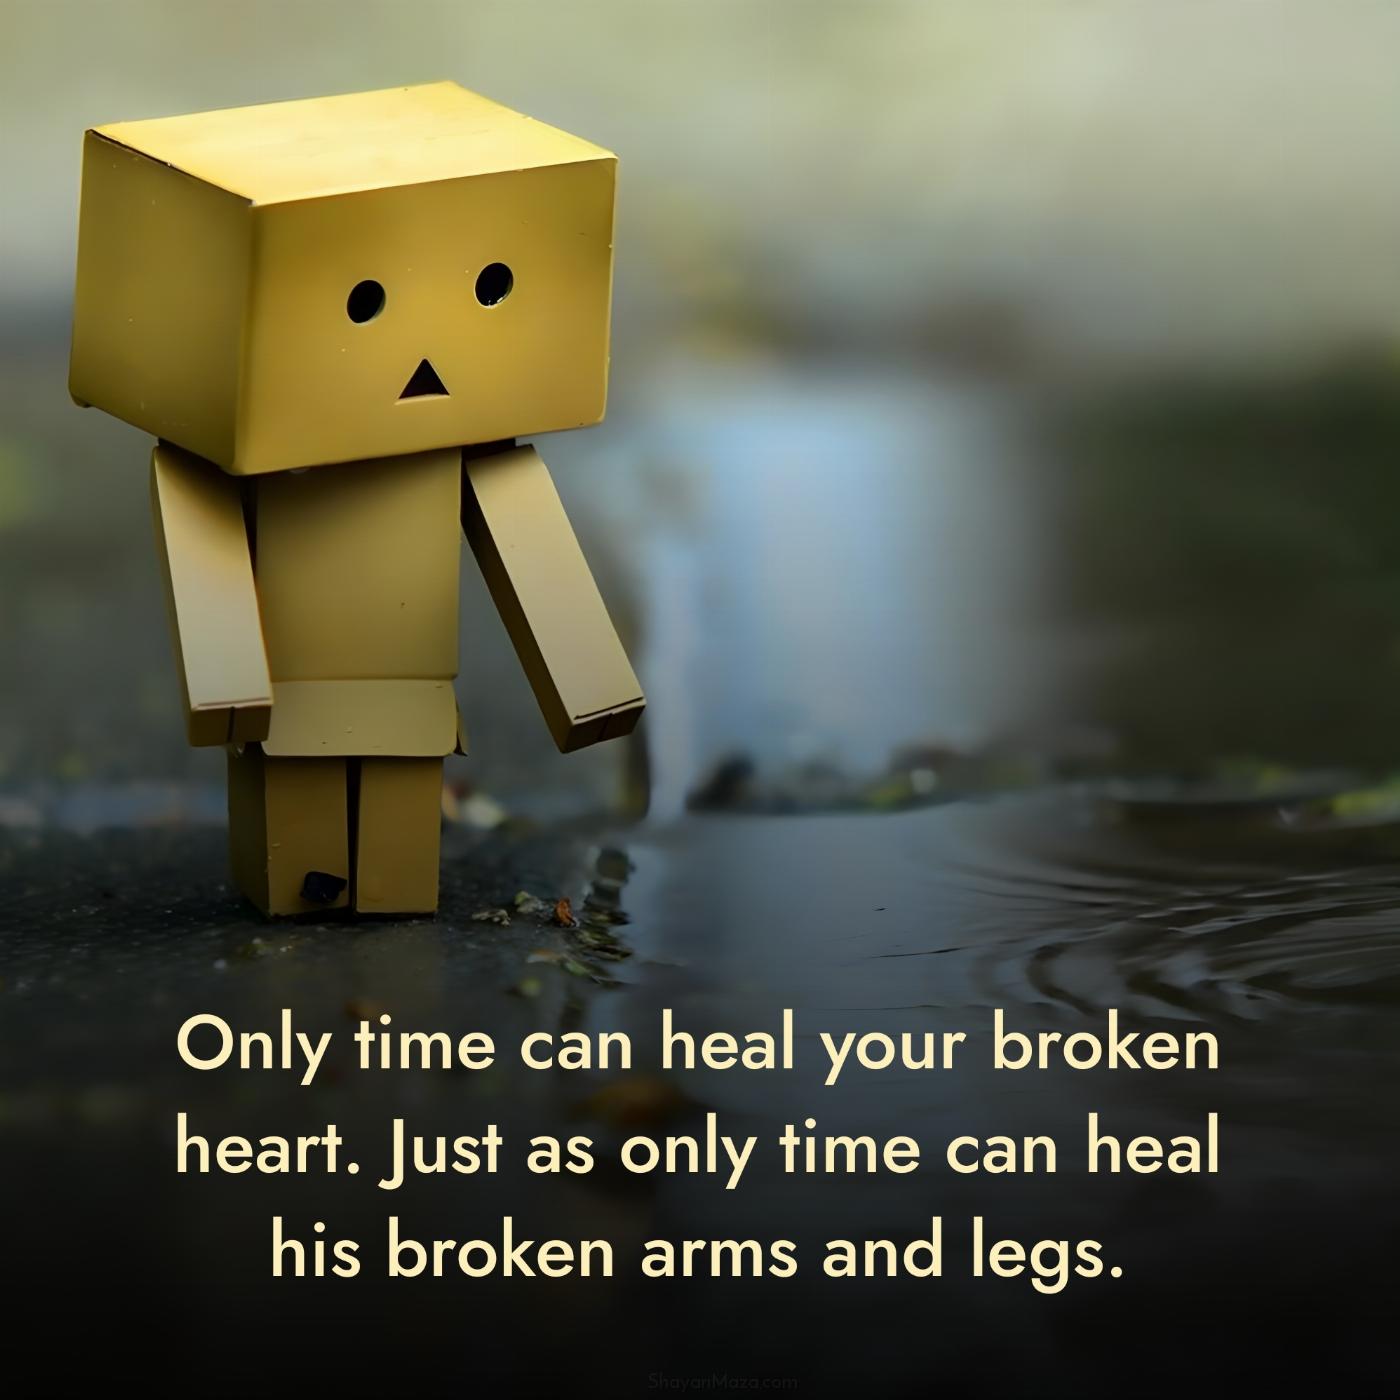 Only time can heal your broken heart